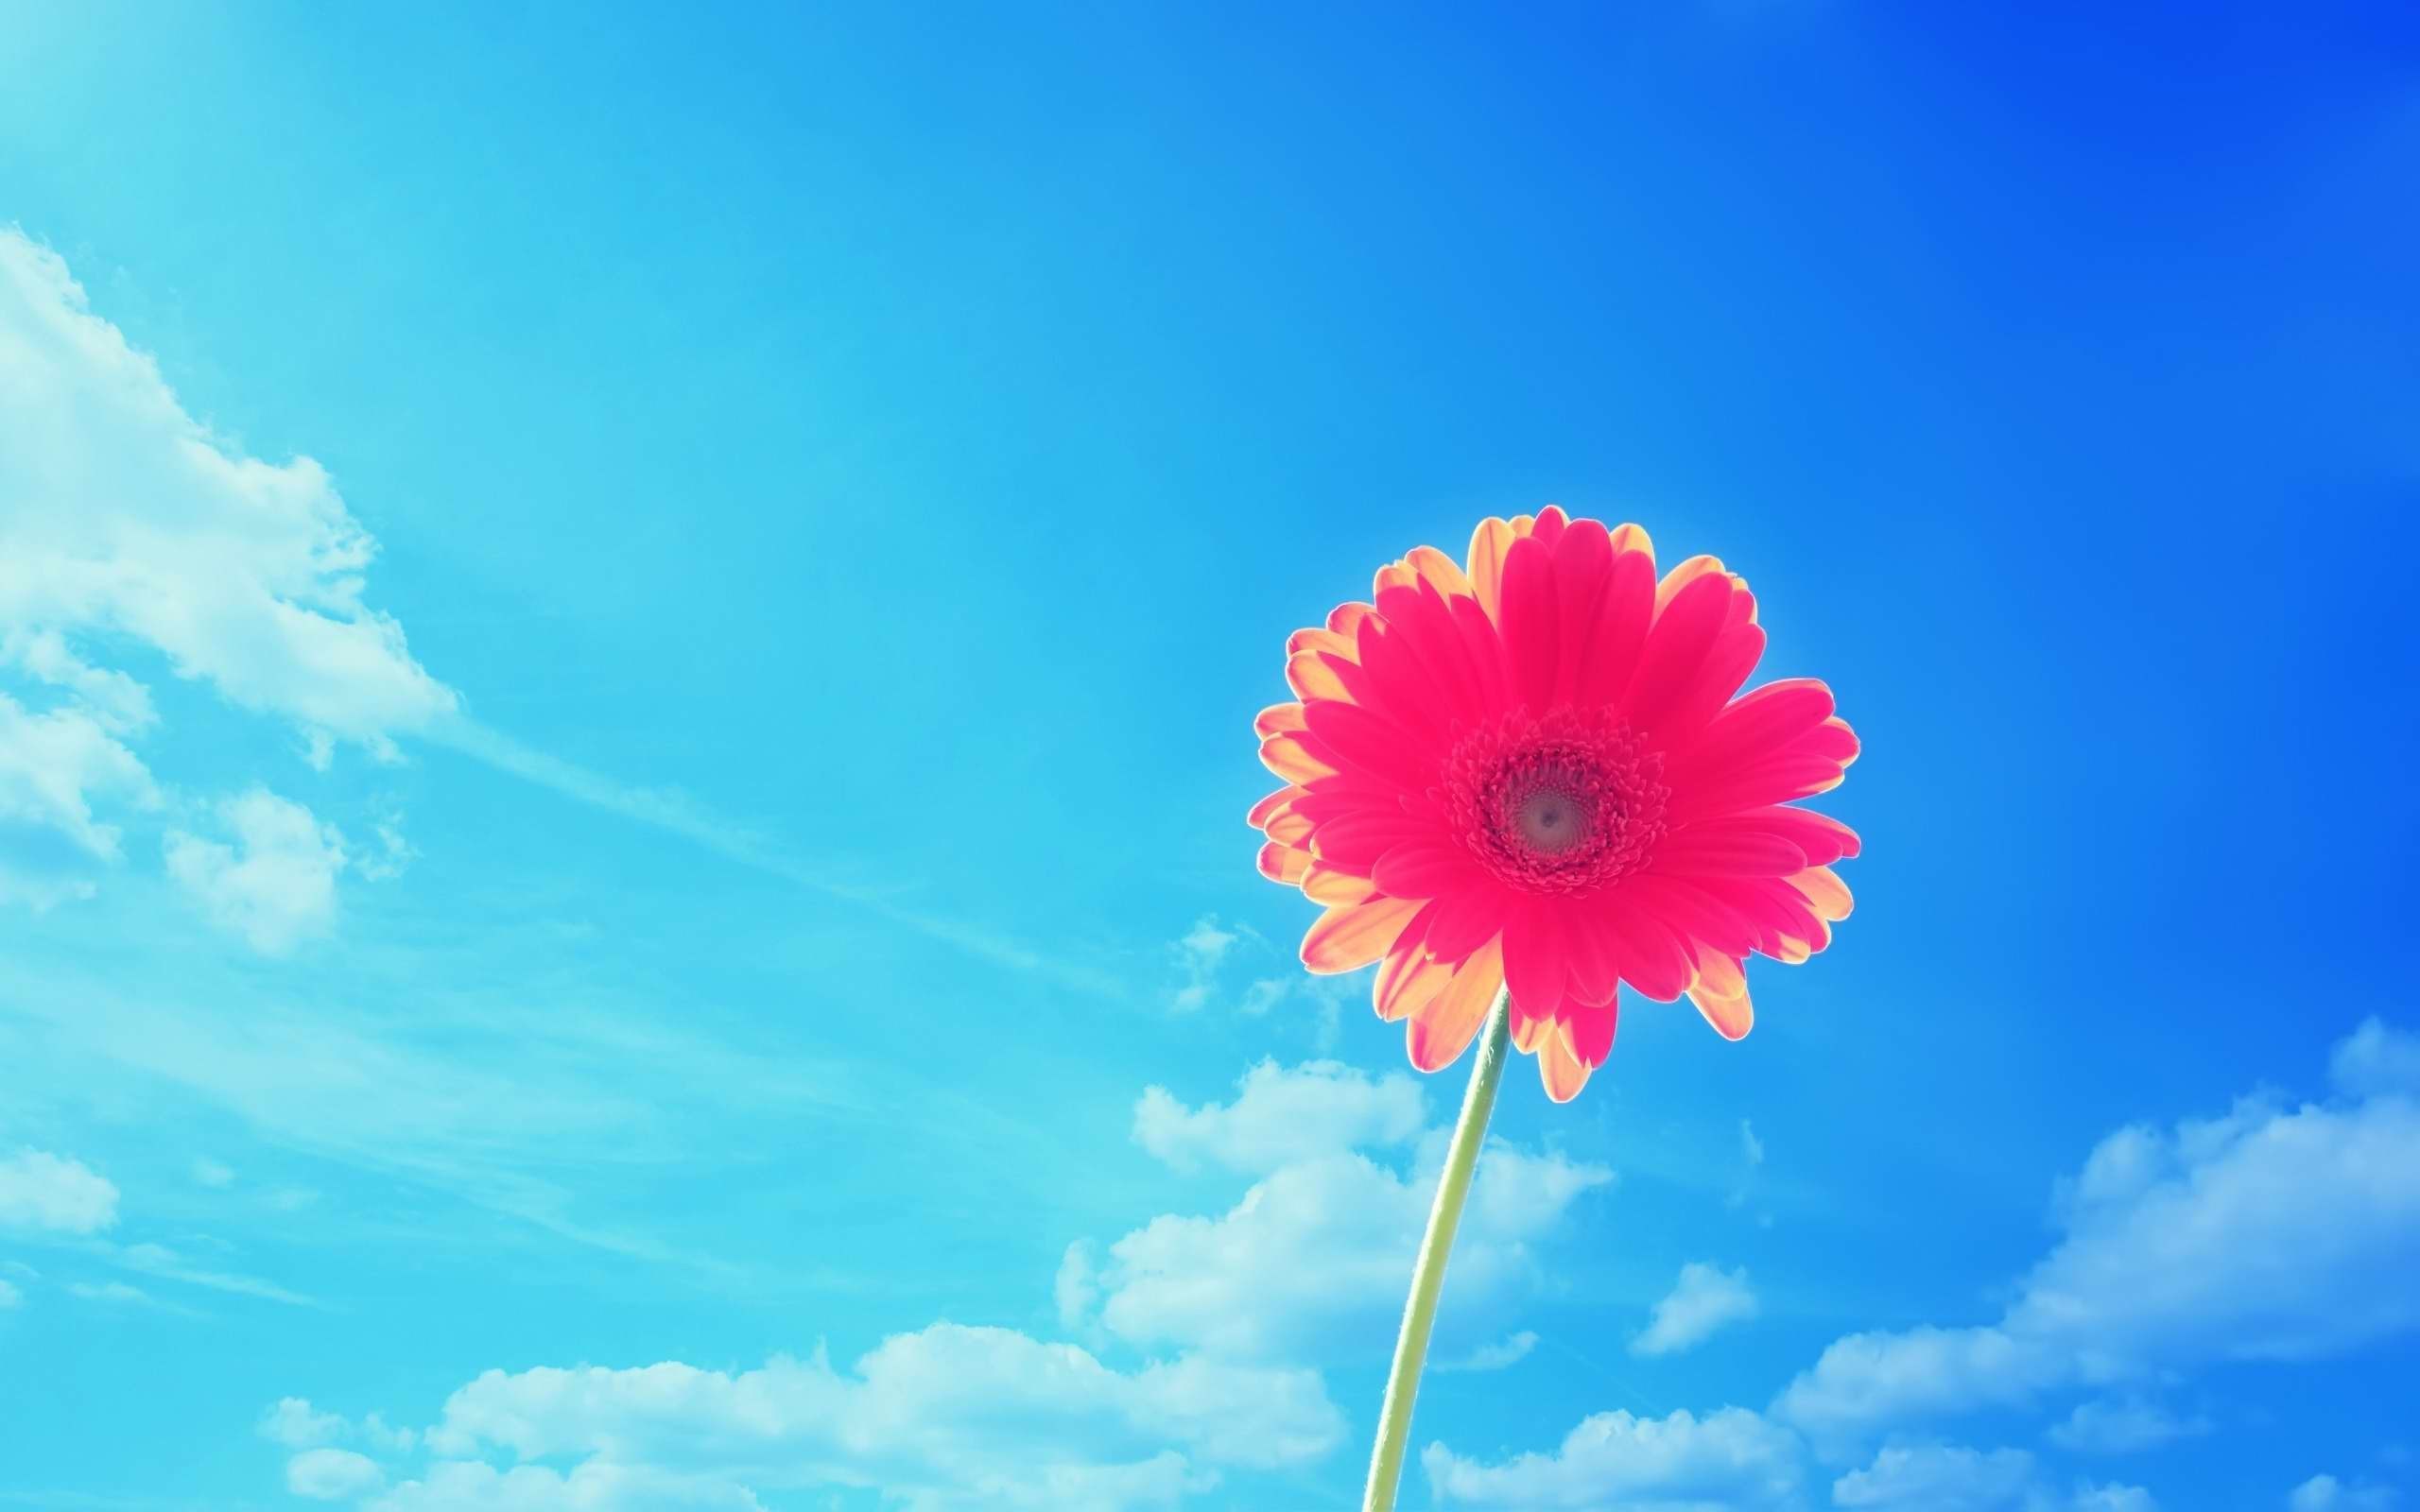 A pink flower with a blue sky in the background - Bright